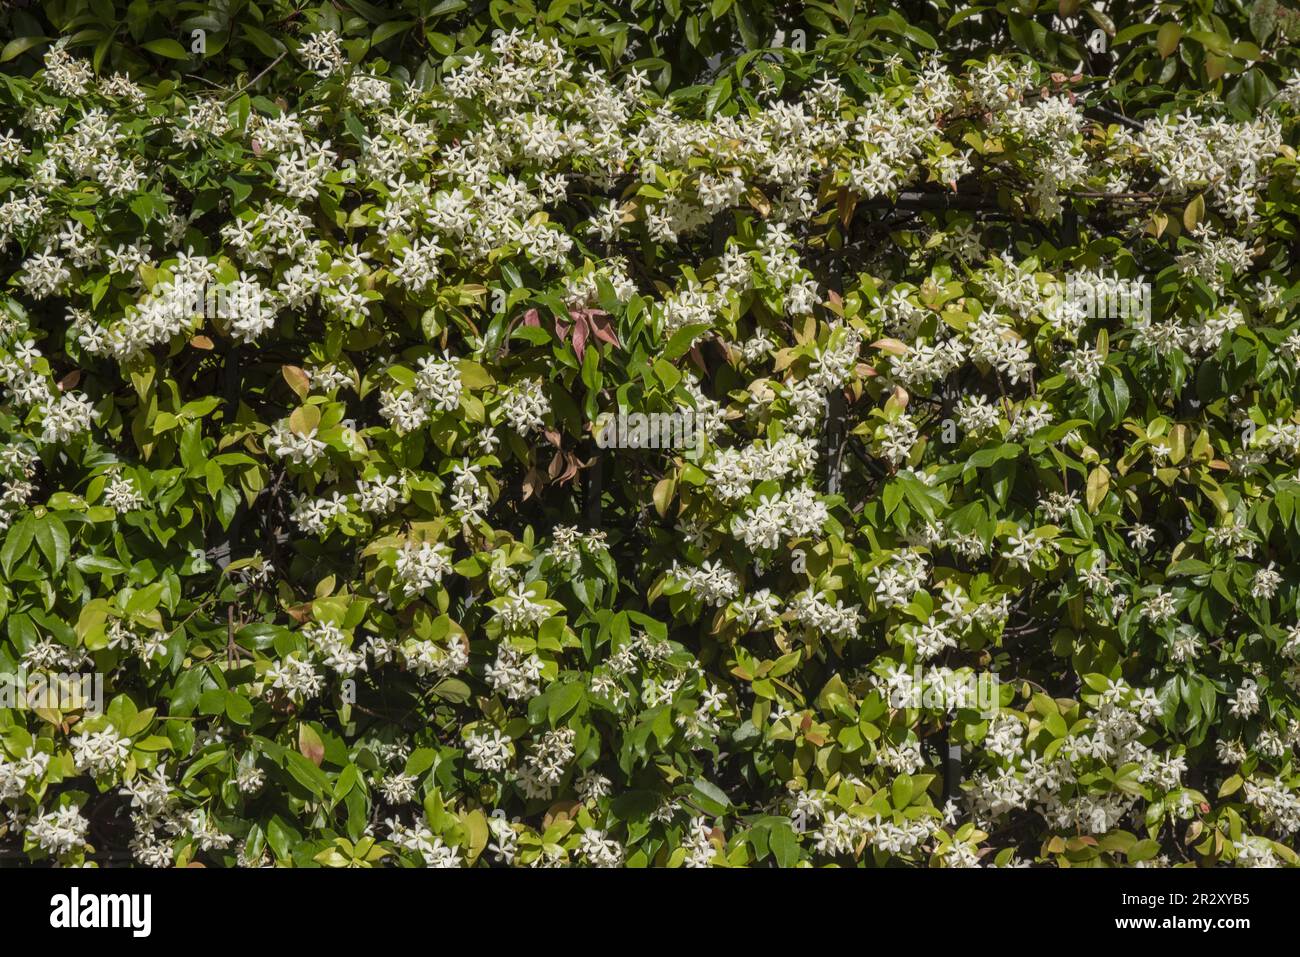 A hedge full of flowers in an urban garden Stock Photo